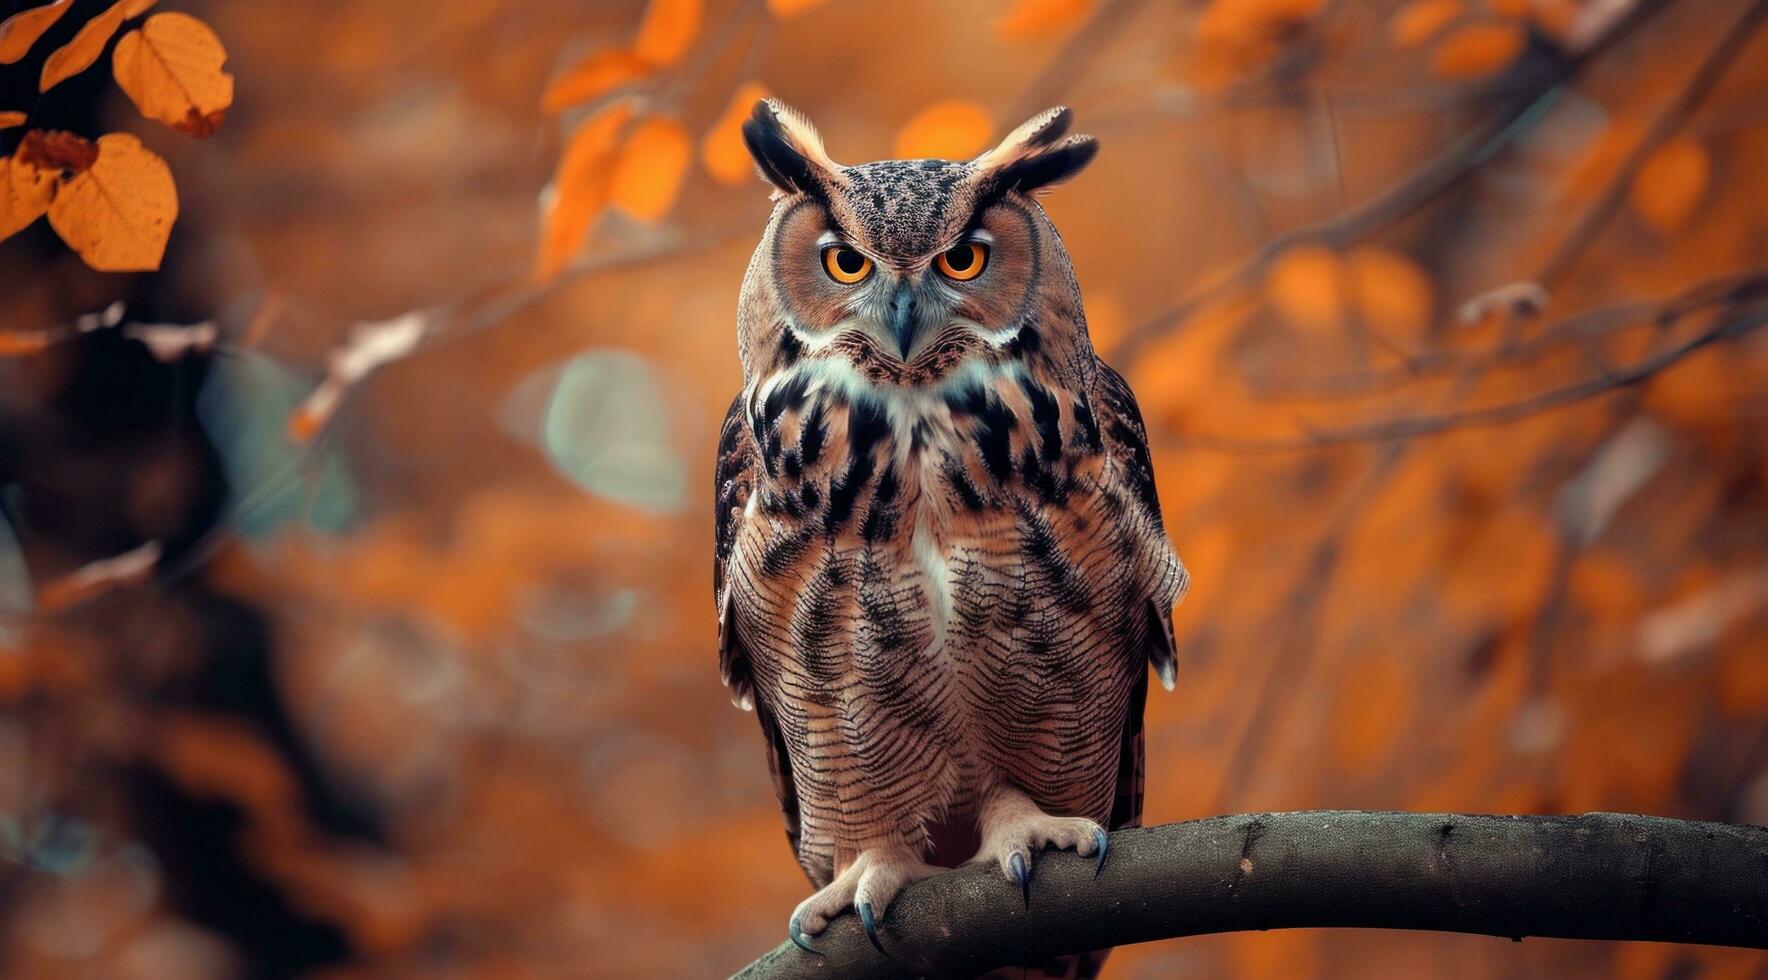 AI generated a large owl sitting on a tree branch photo